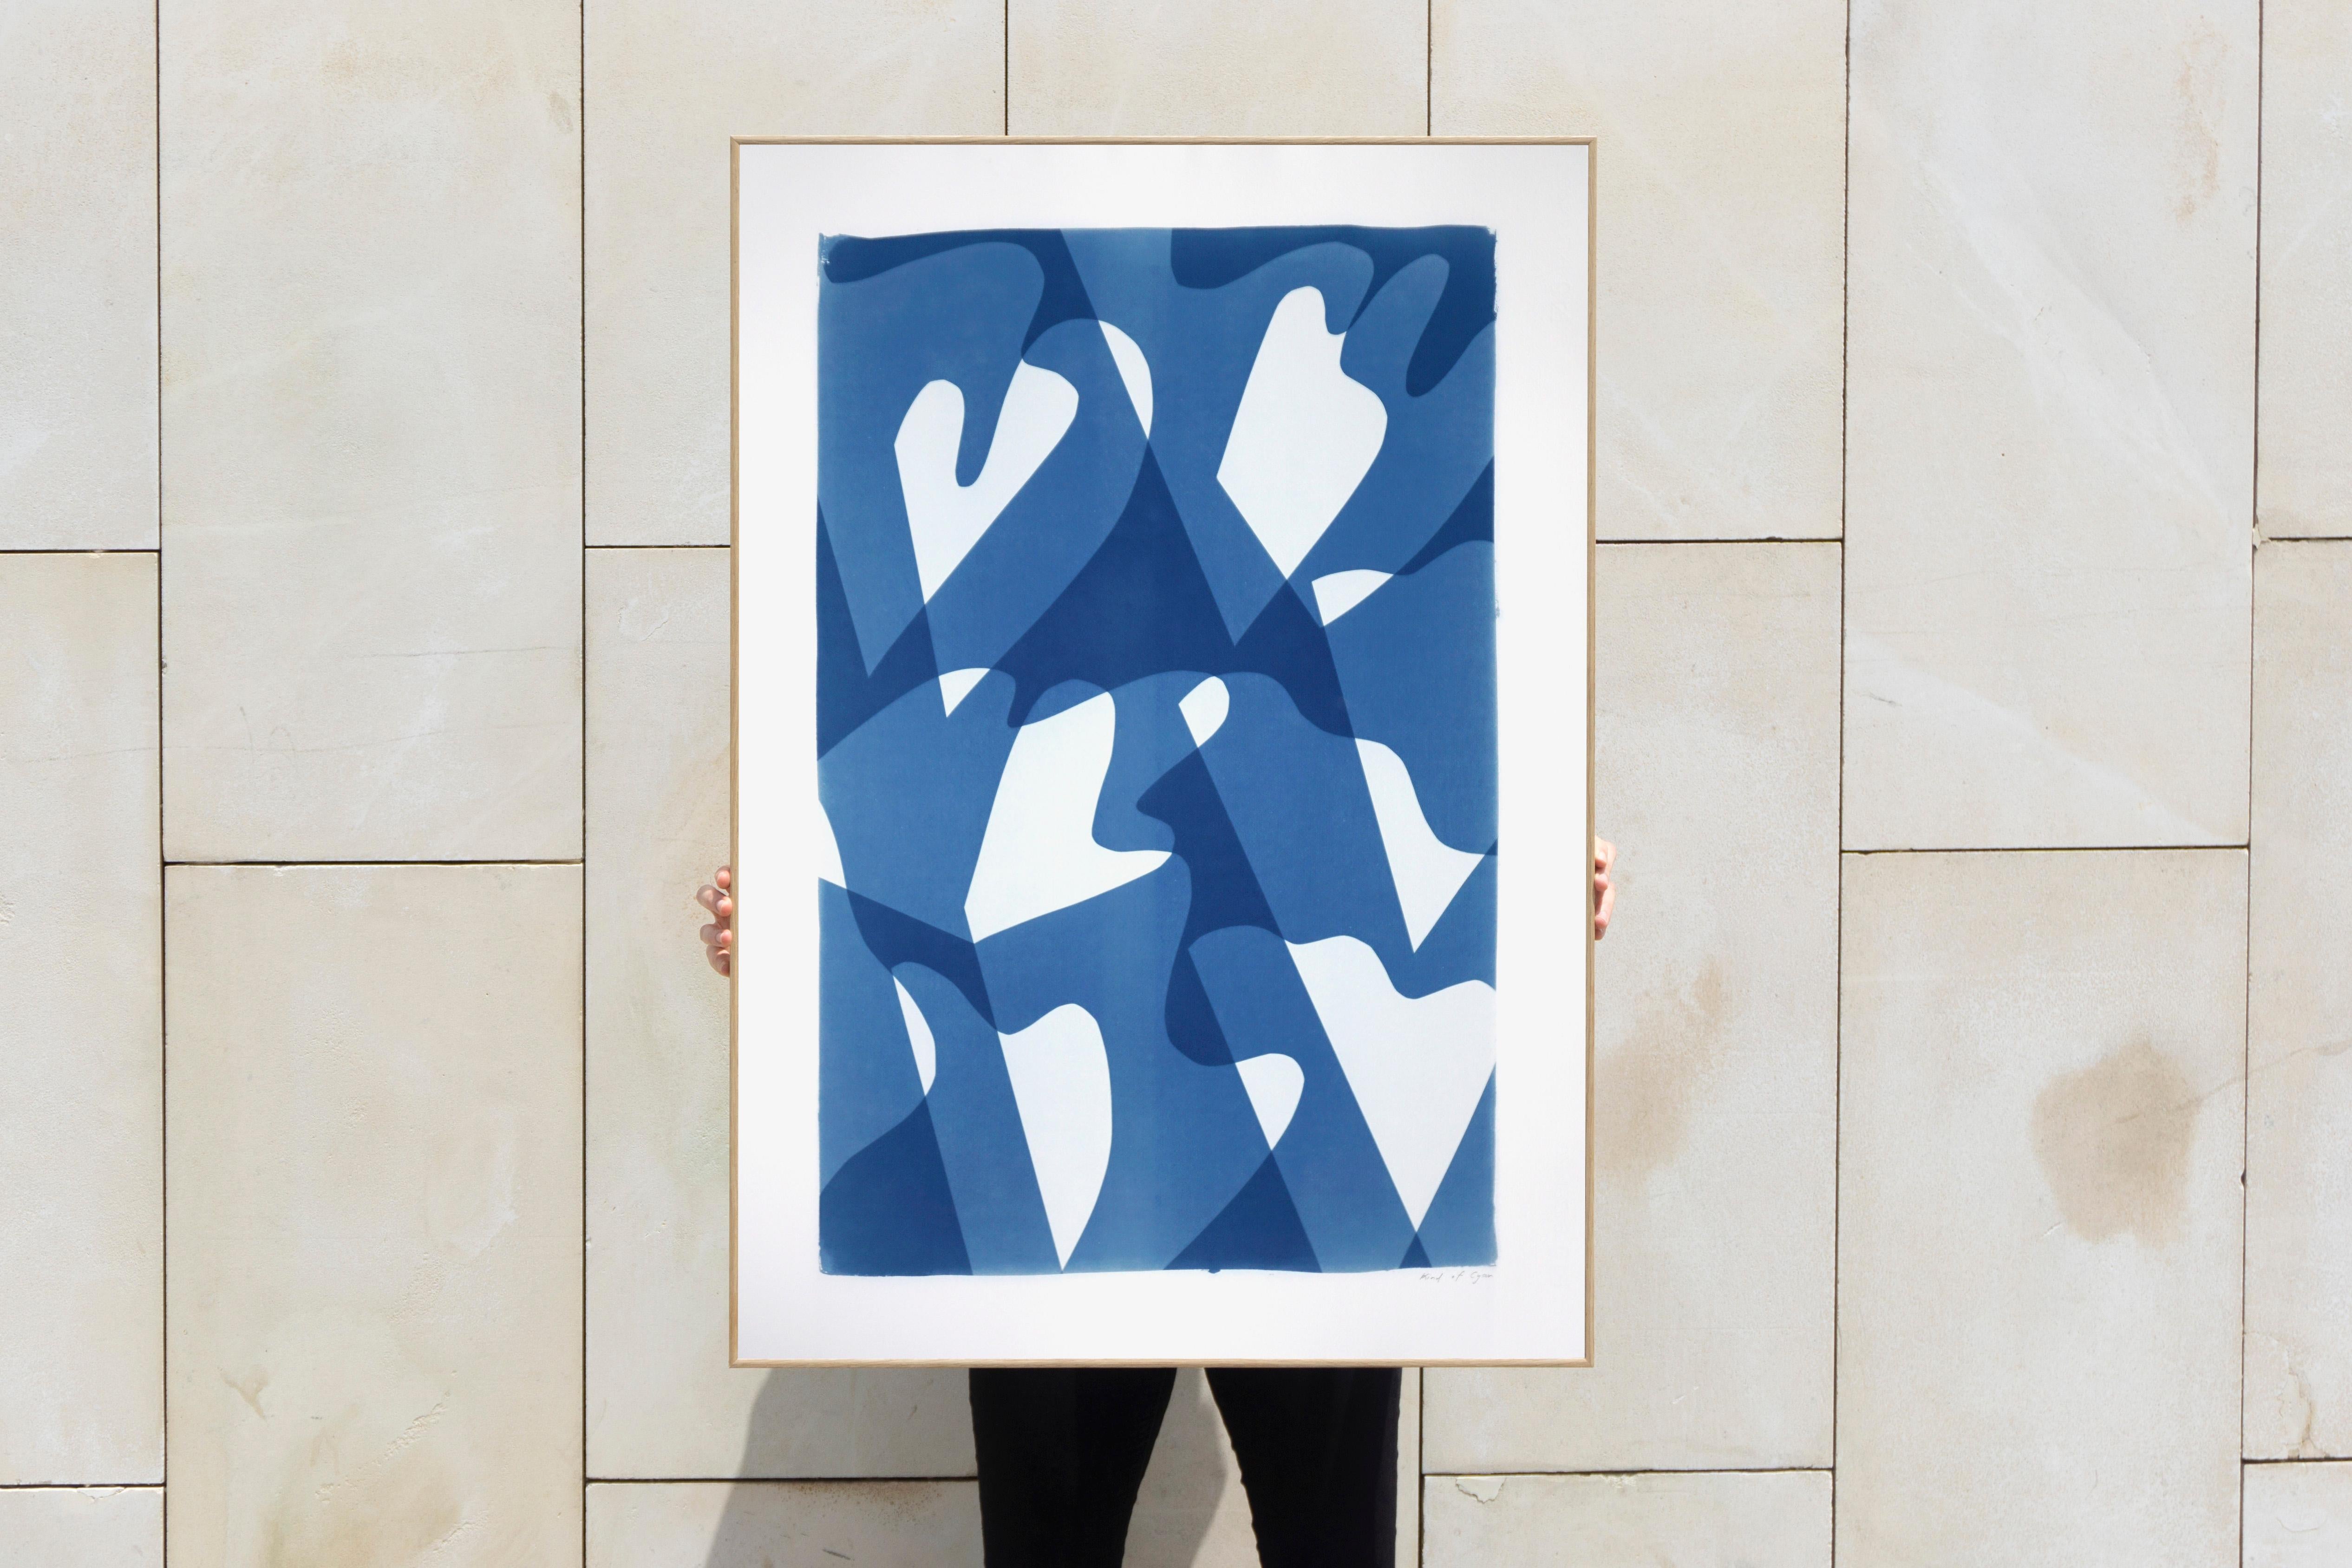 This is an exclusive handprinted unique cyanotype that takes its inspiration from the mid-century modern shapes.
It's made by layering paper cutouts and different exposures using uv-light. 

Details:
+ Title: Wind over Waters
+ Year: 2021
+ Stamped